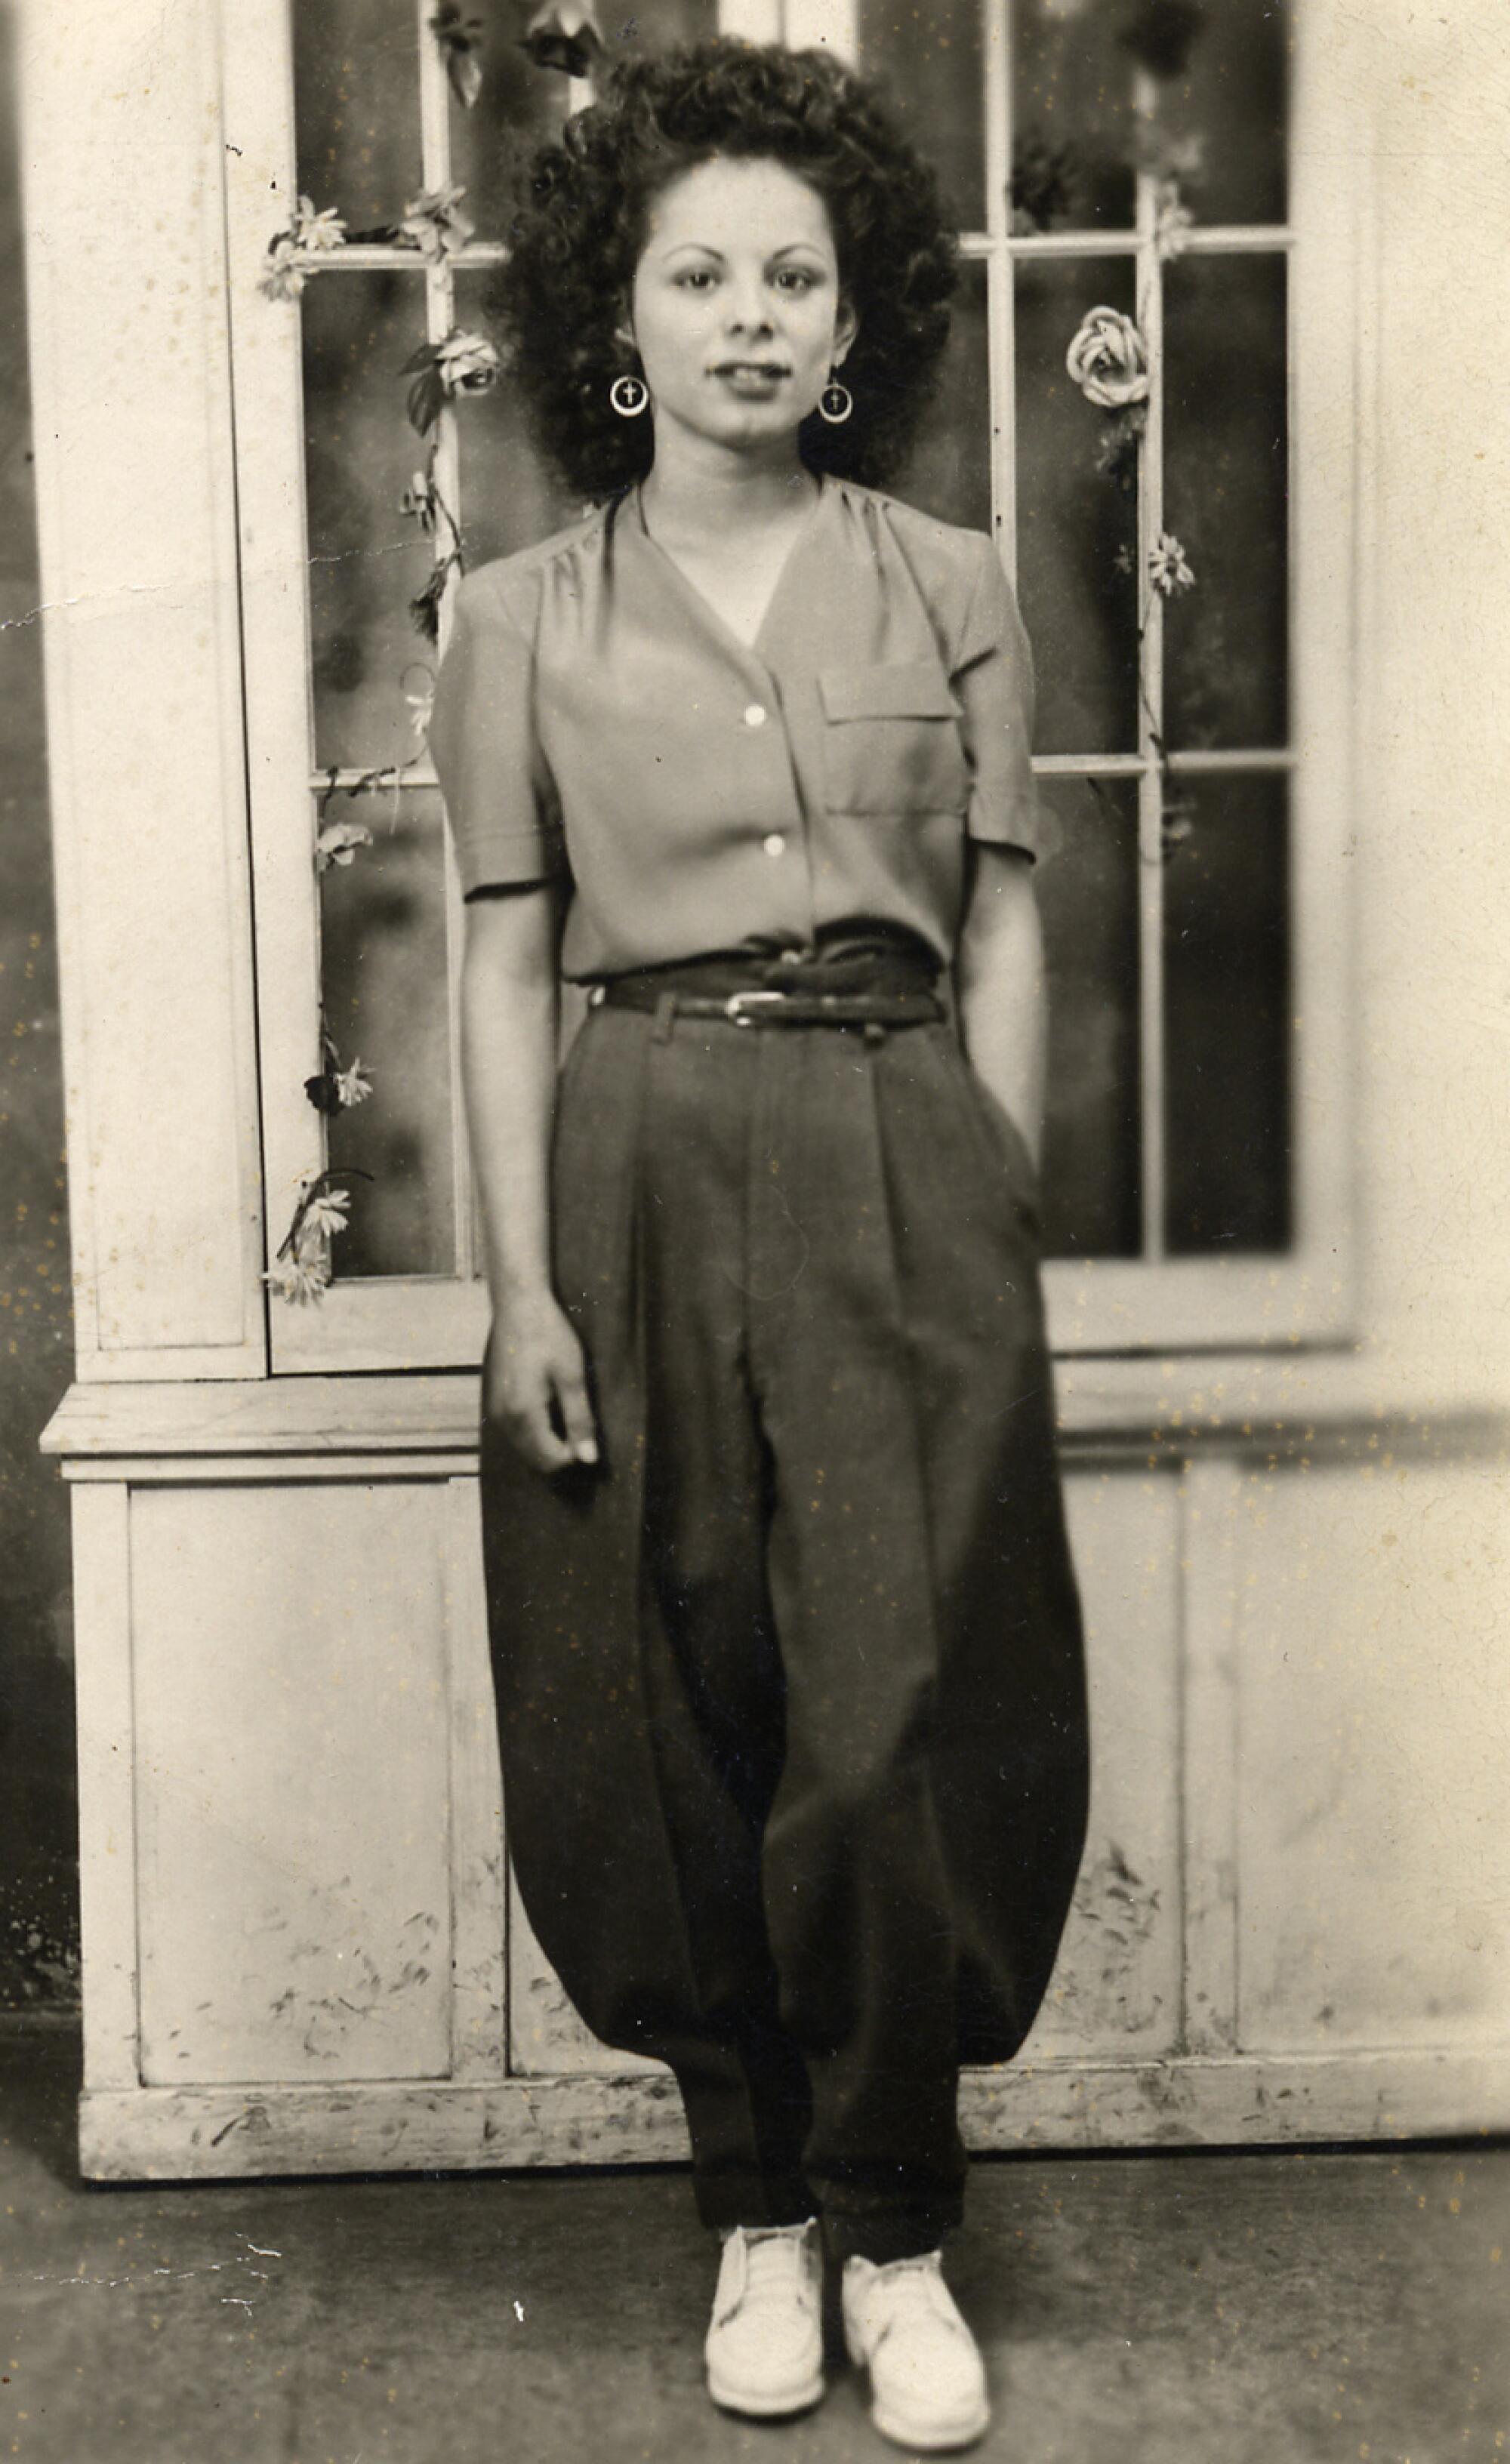 A historic photo shows a woman wearing 1940s drape pants that flare at the knee with a button-down blouse. 